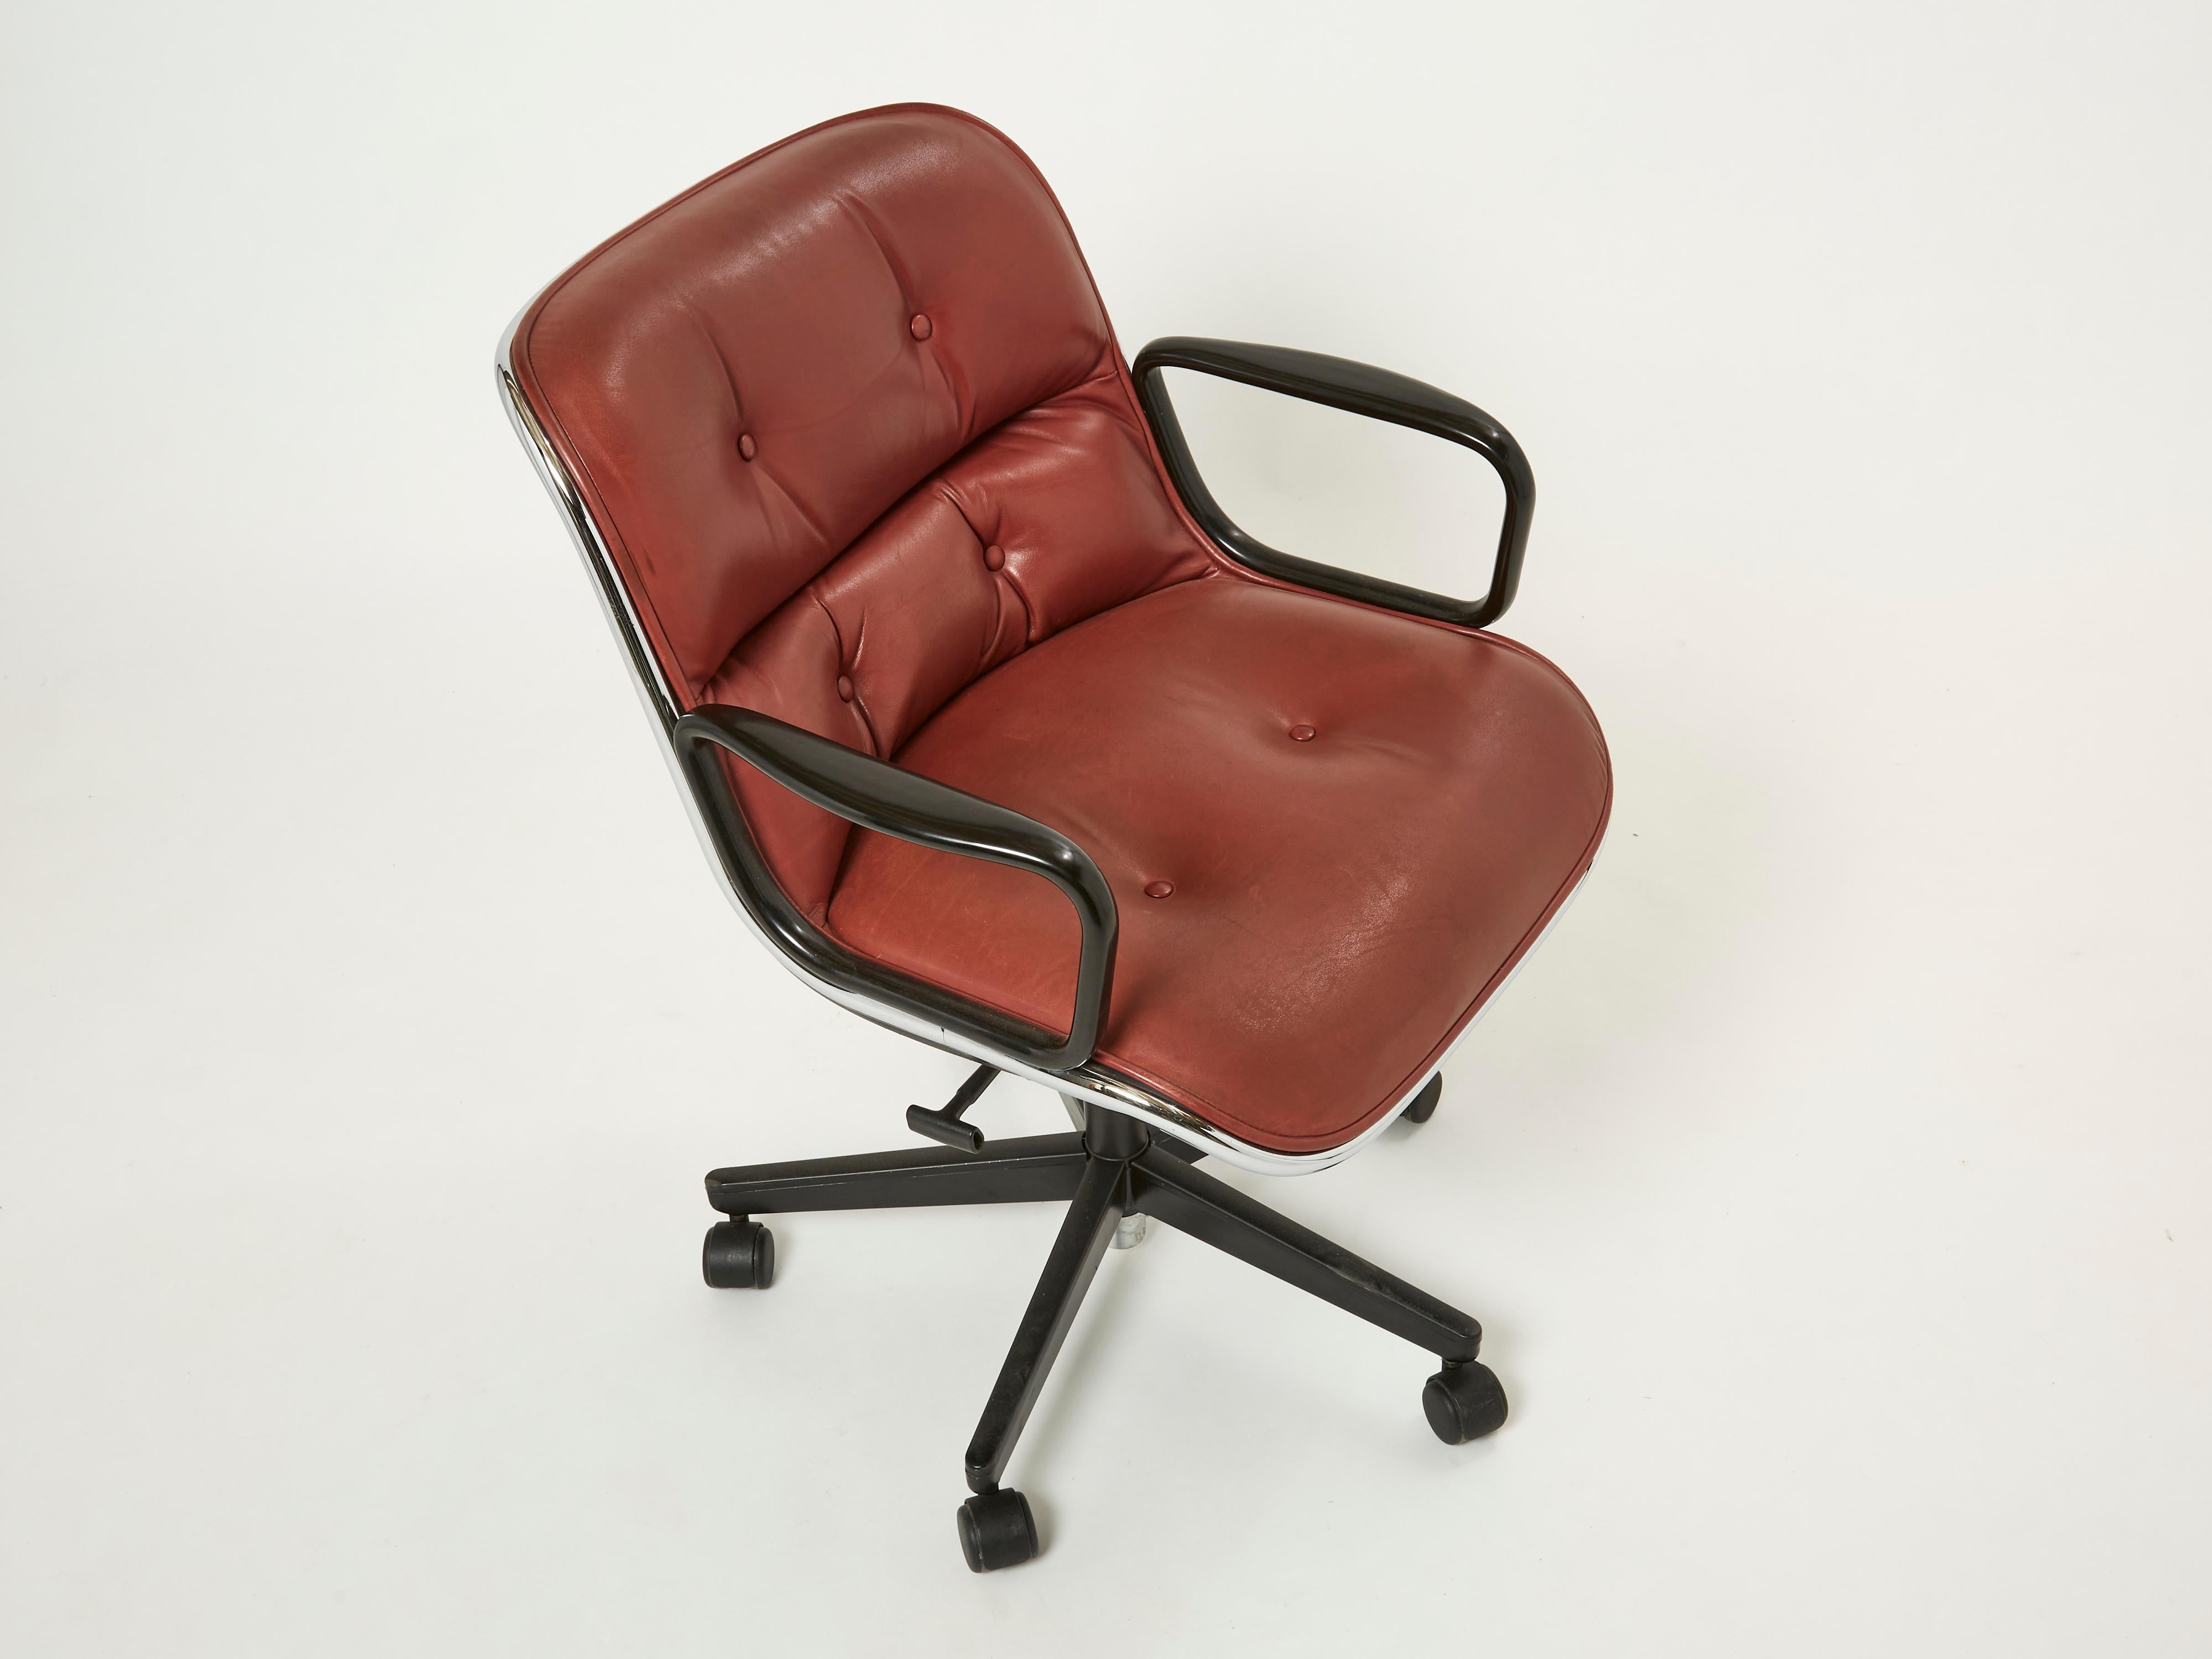 Mid-Century Modern Charles Pollock Executive Desk Chair for Knoll in brown Leather 1990